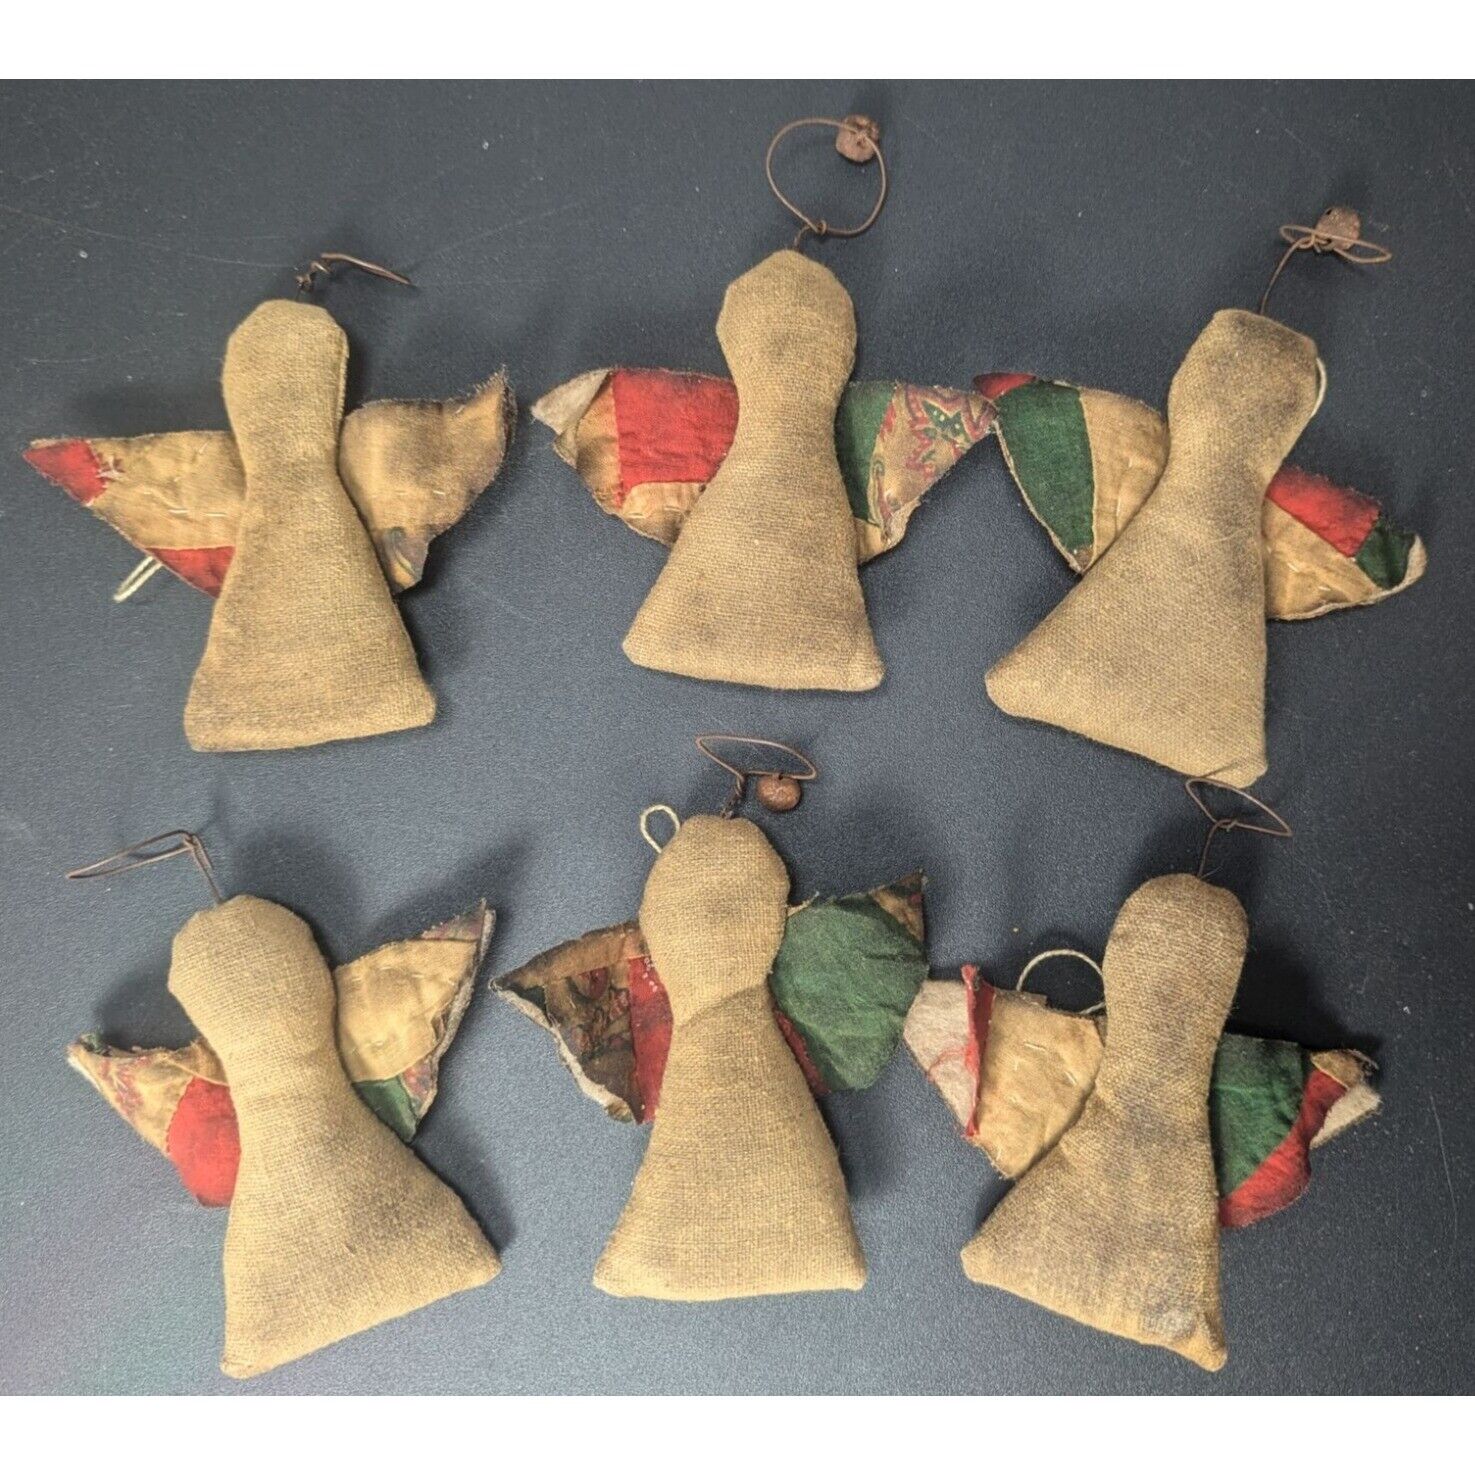 Primitive Fabric Angels Christmas Ornaments Lot of 6 Rustic Brown 4.5in